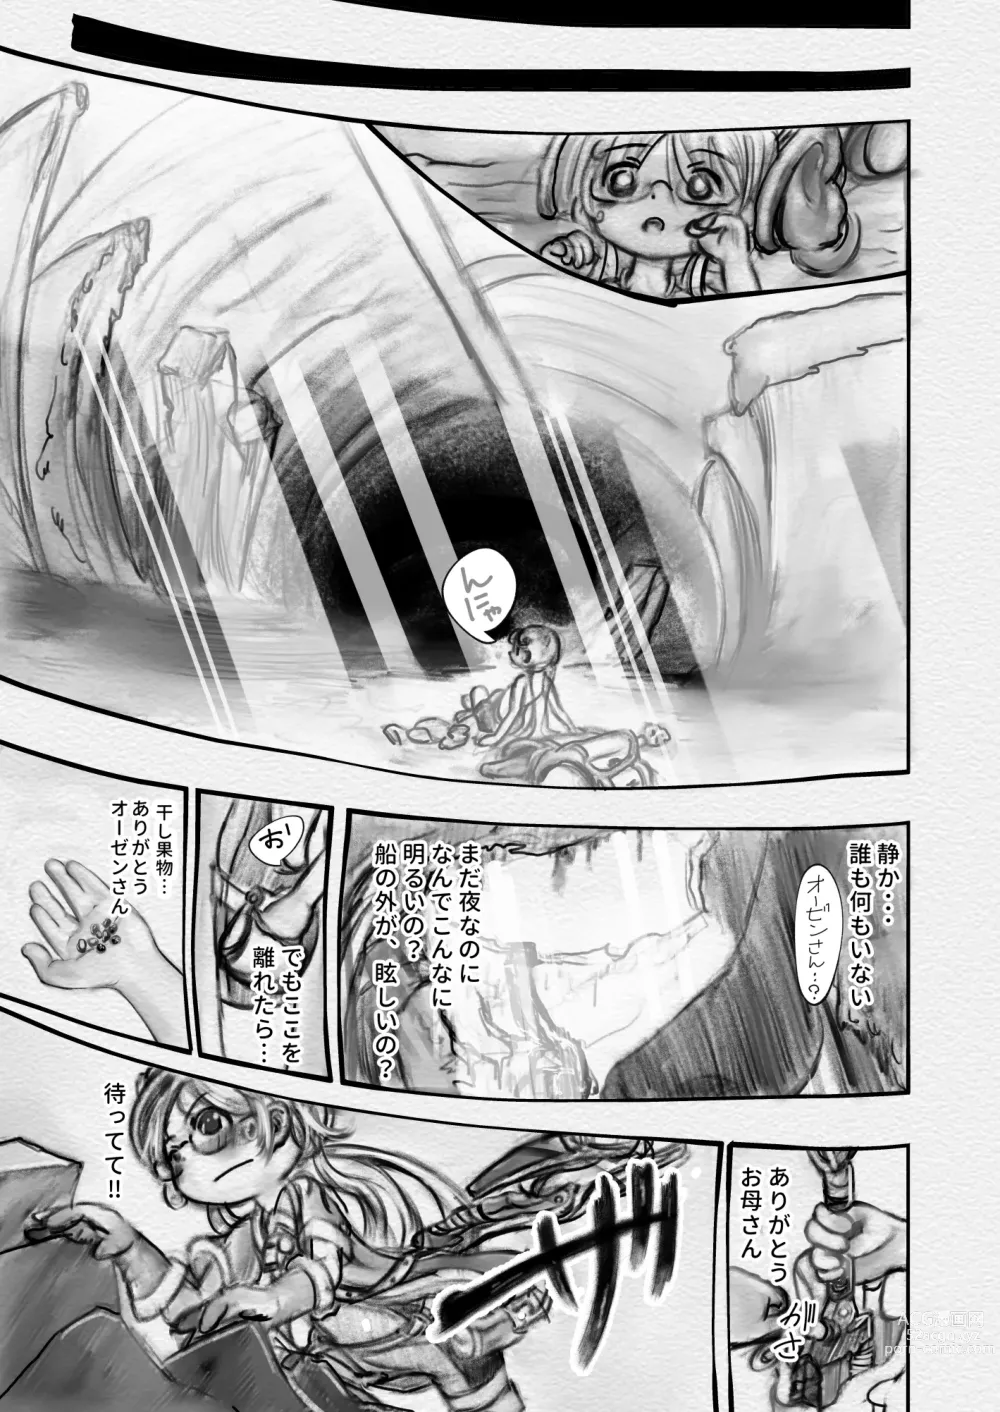 Page 39 of doujinshi Abyss Diver